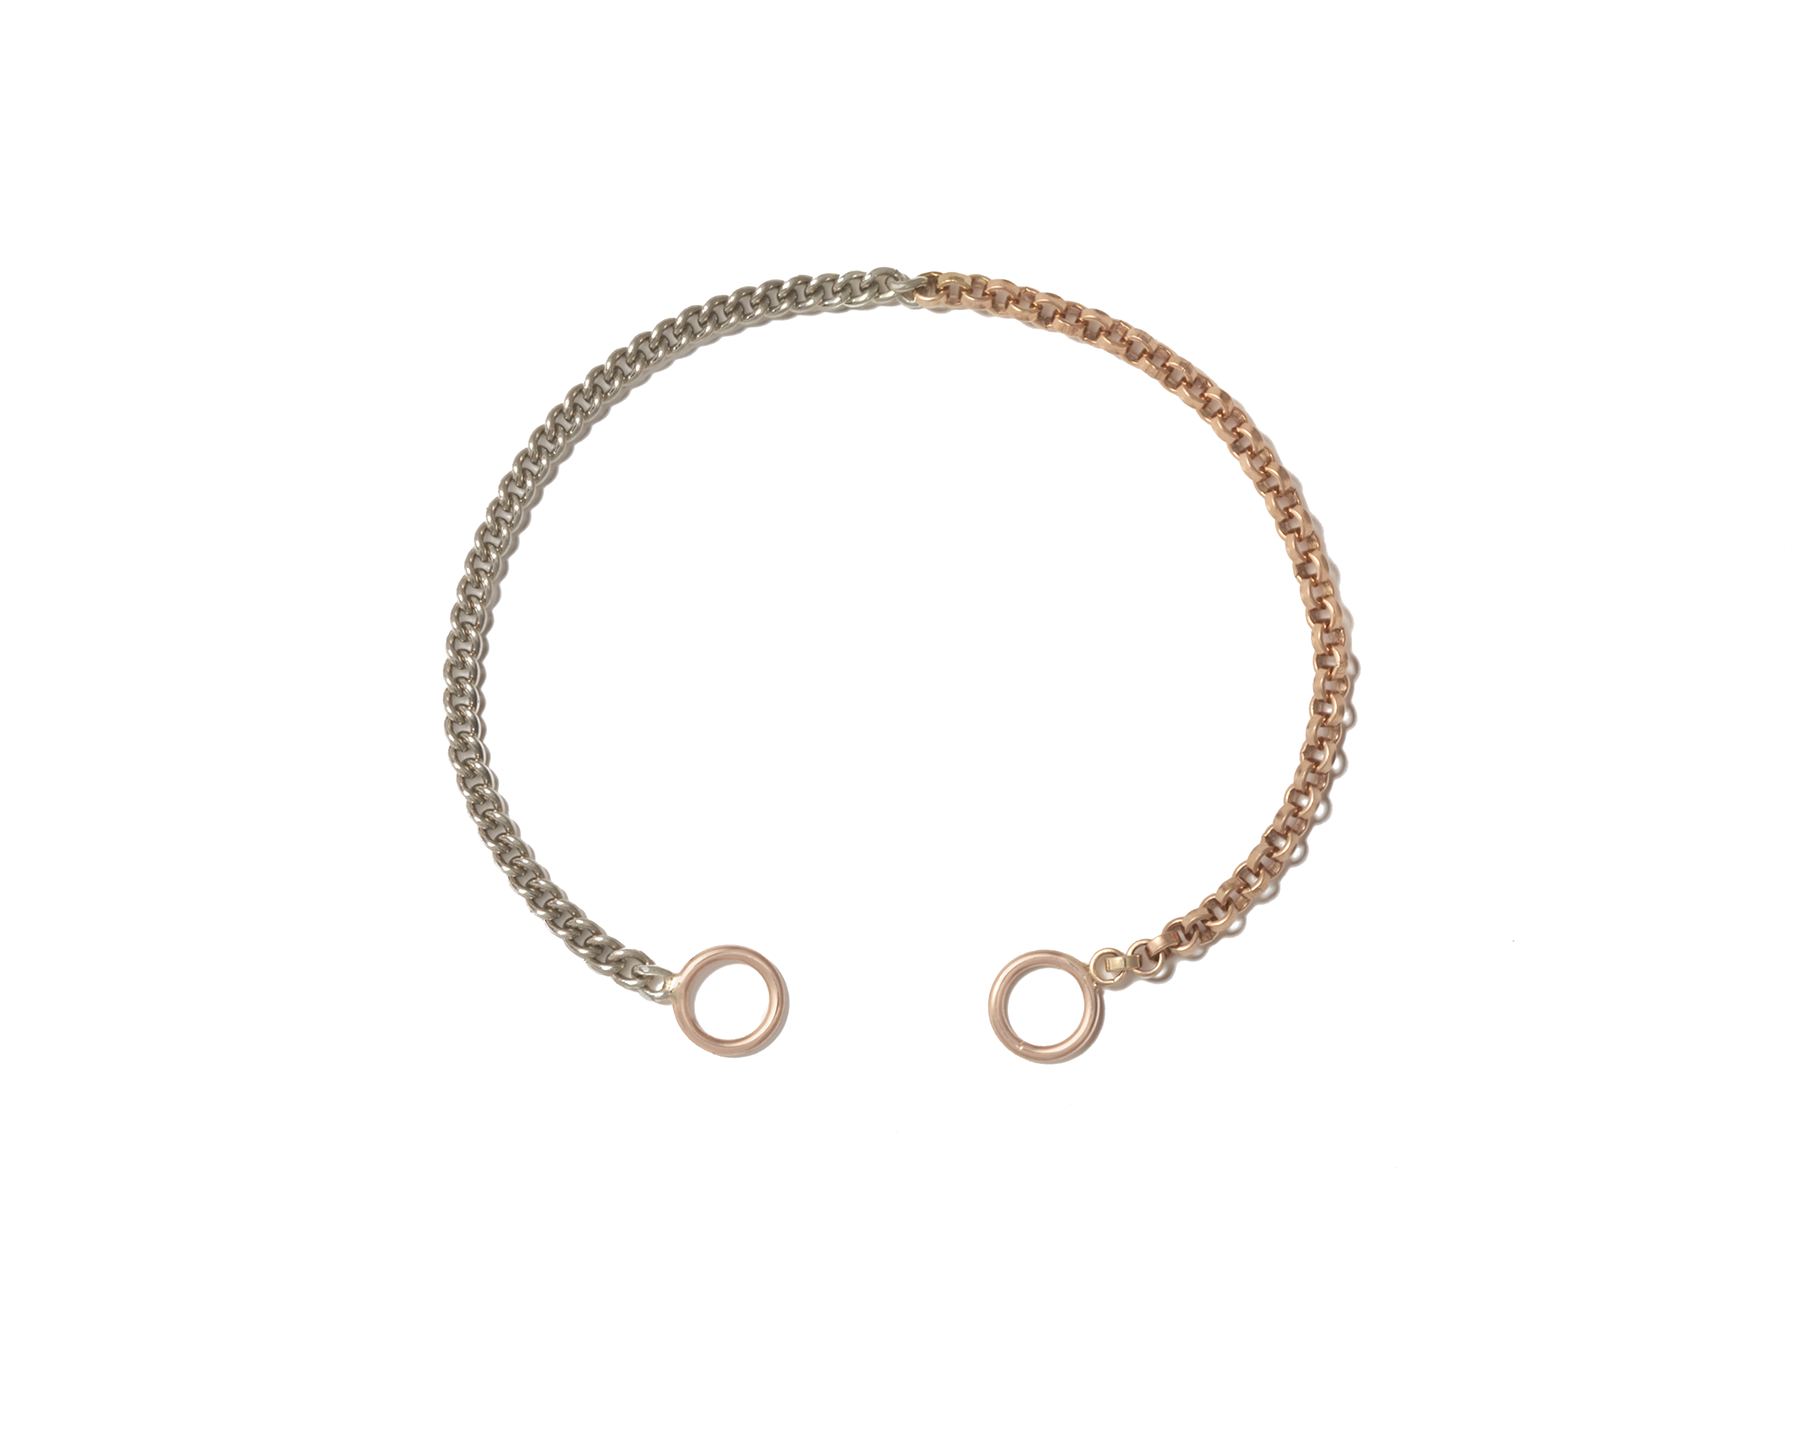 Rose gold and silver chain link bracelet